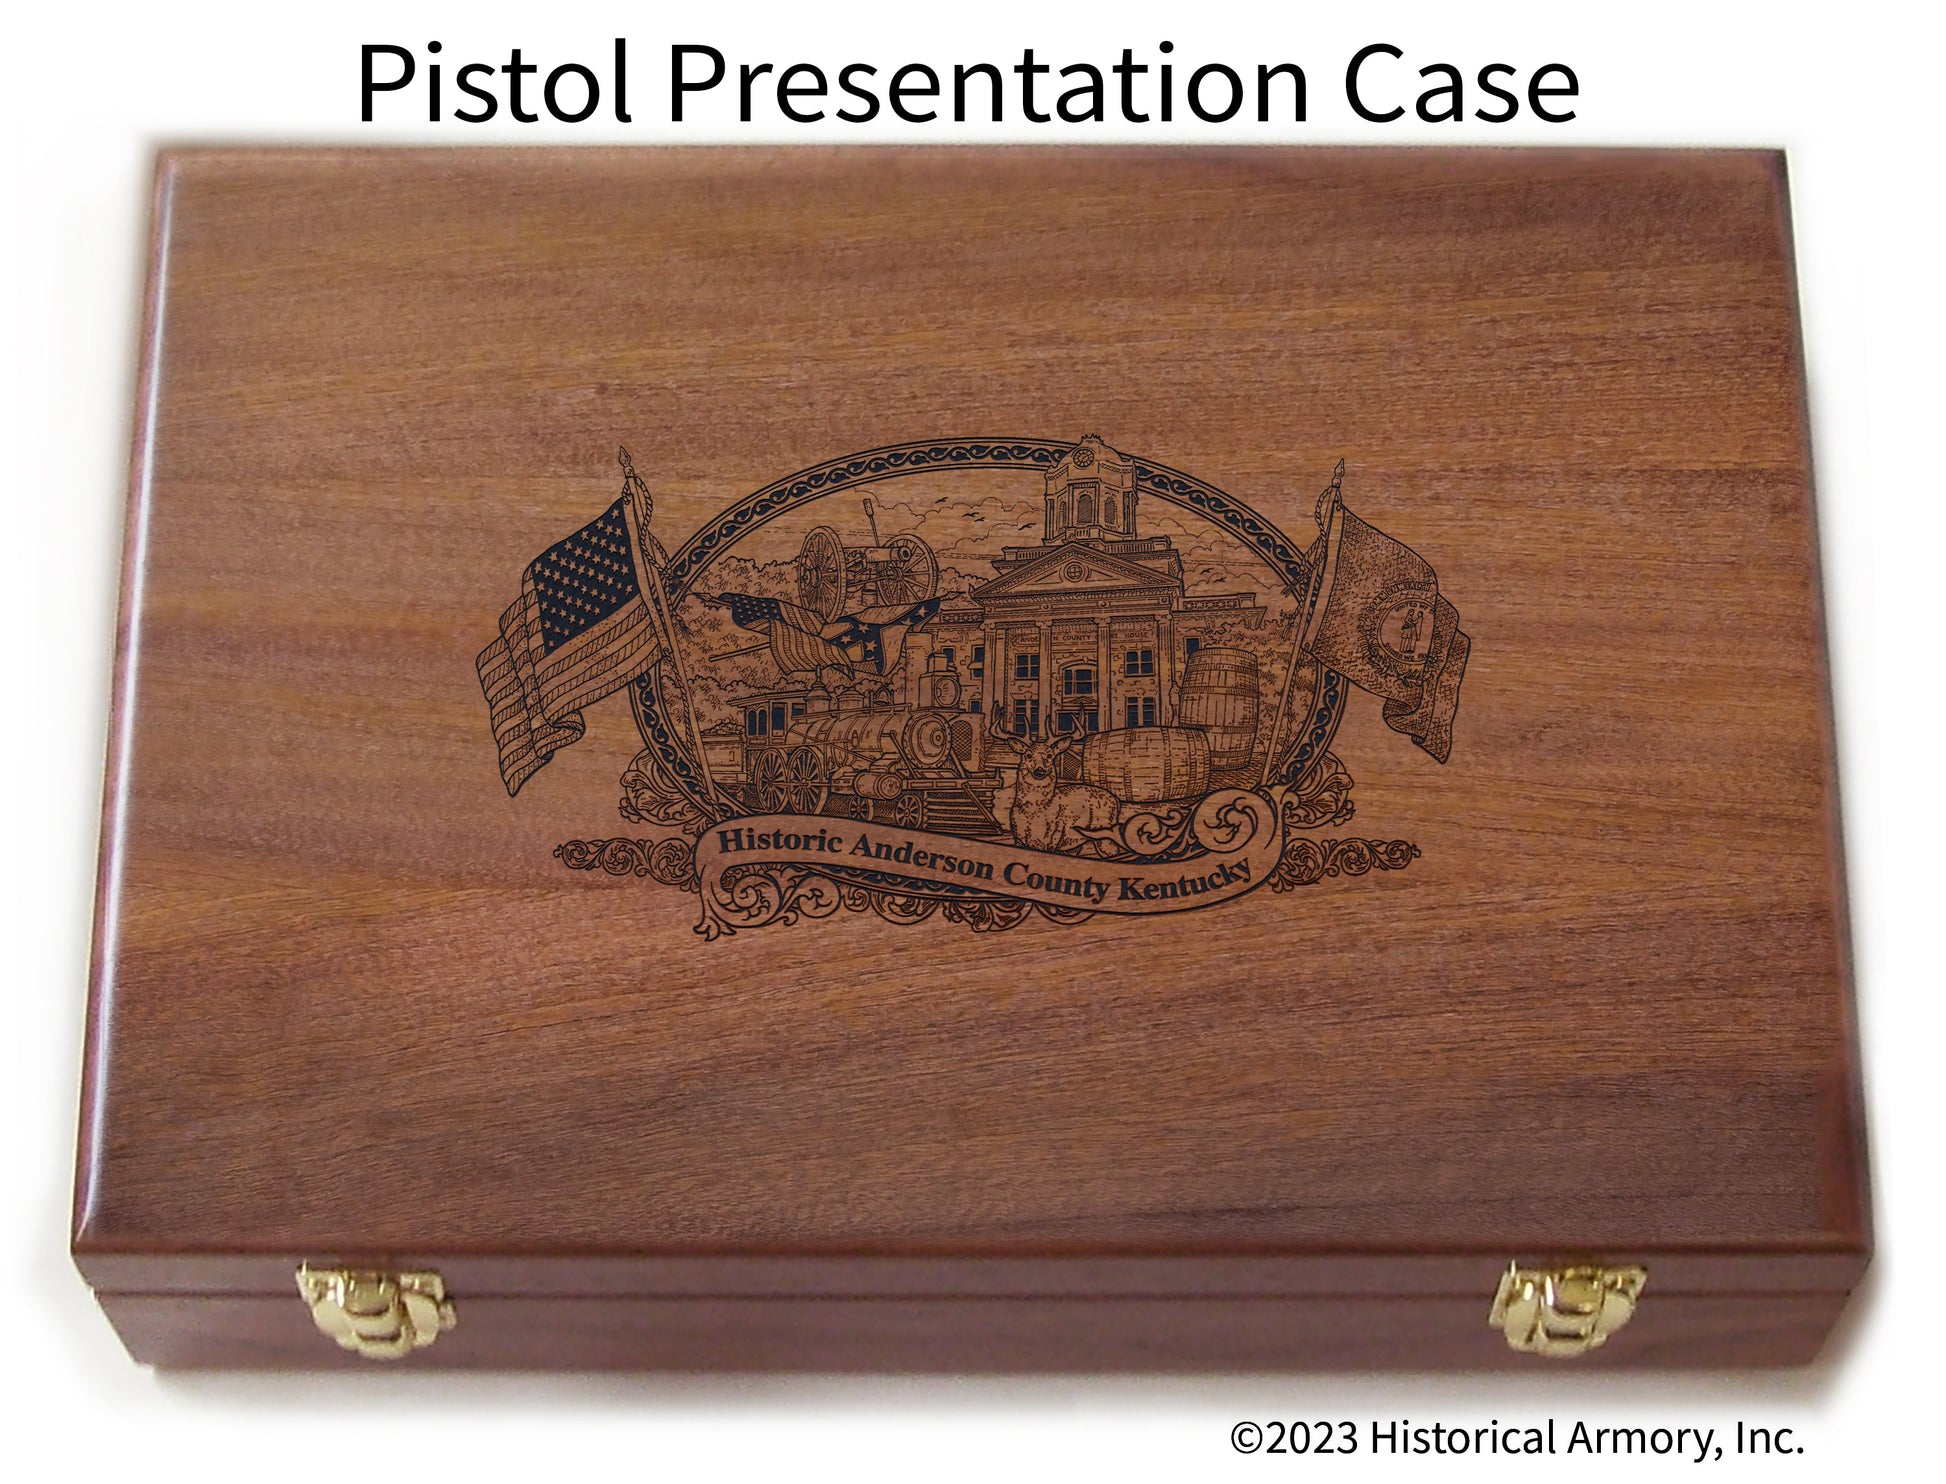 Anderson County Kentucky Engraved .45 Auto Ruger 1911 Presentation Case